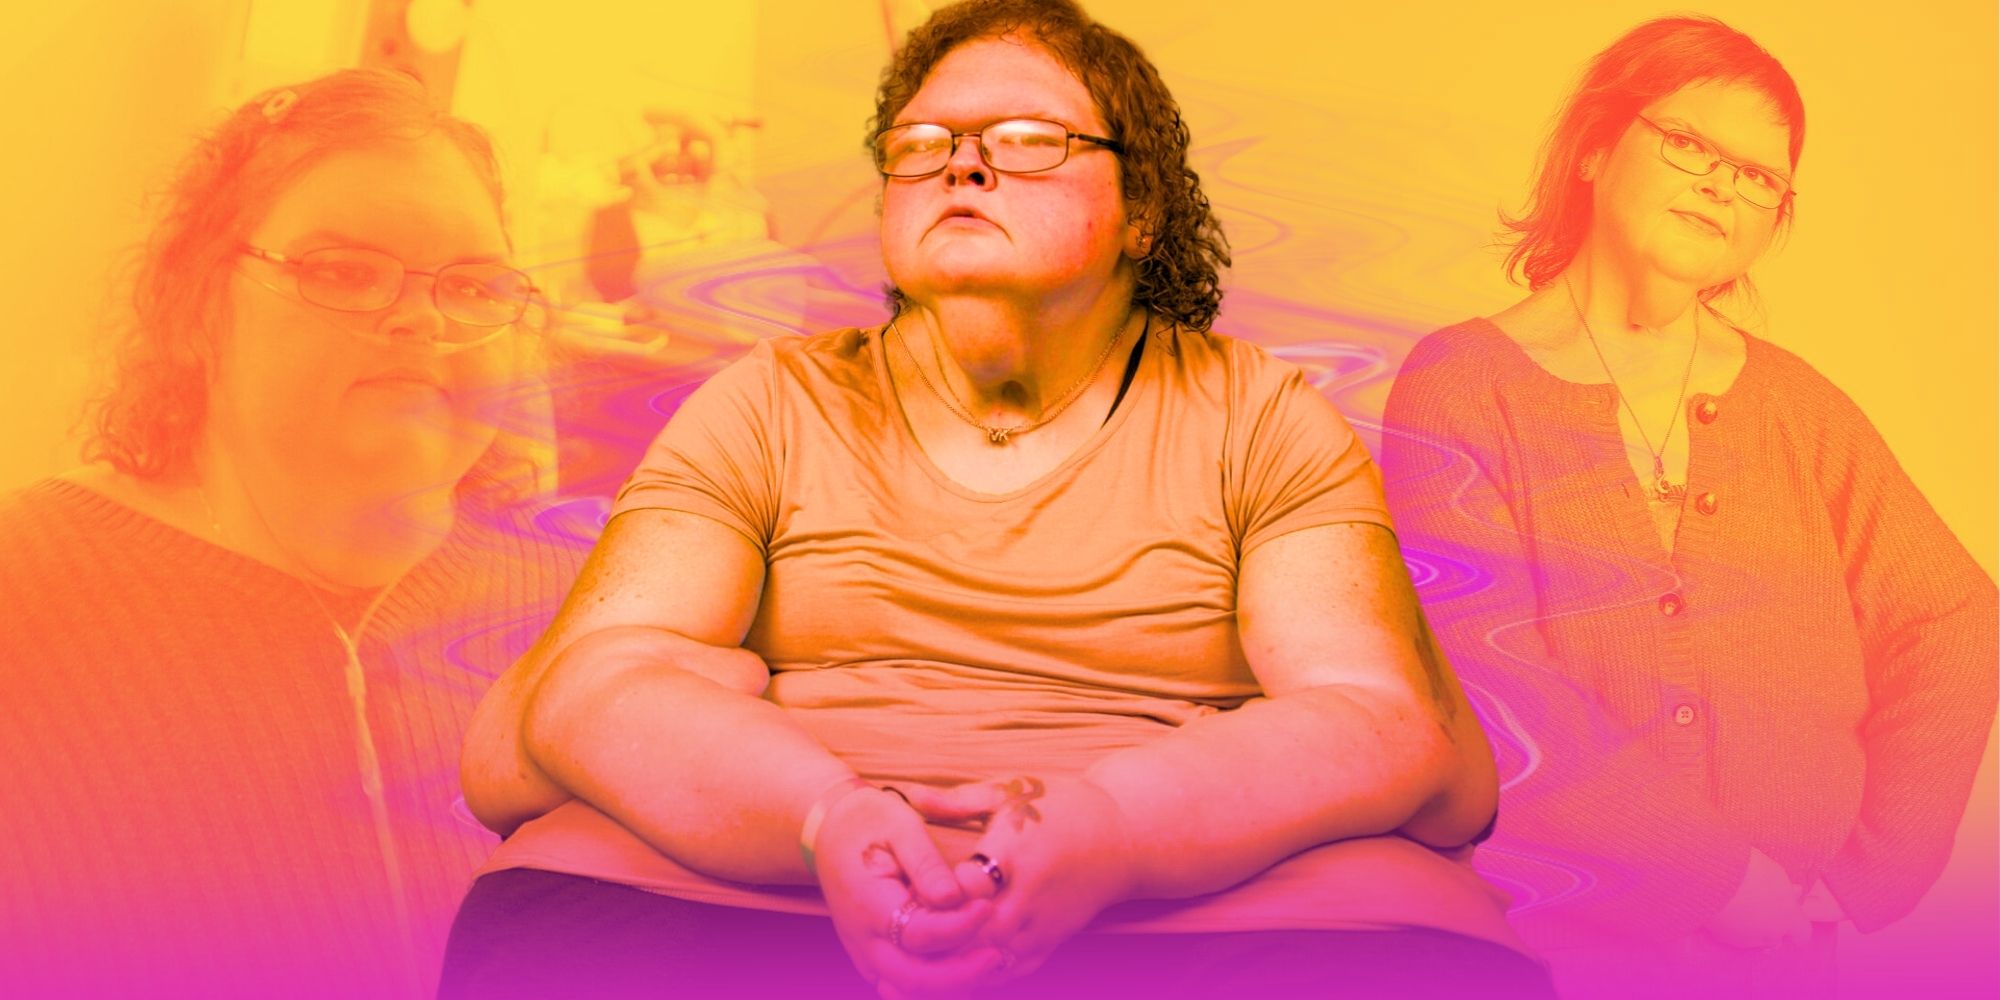 1000-Lb Sisters' Tammy Slaton in orange t-shirt sitting down with eyes closed